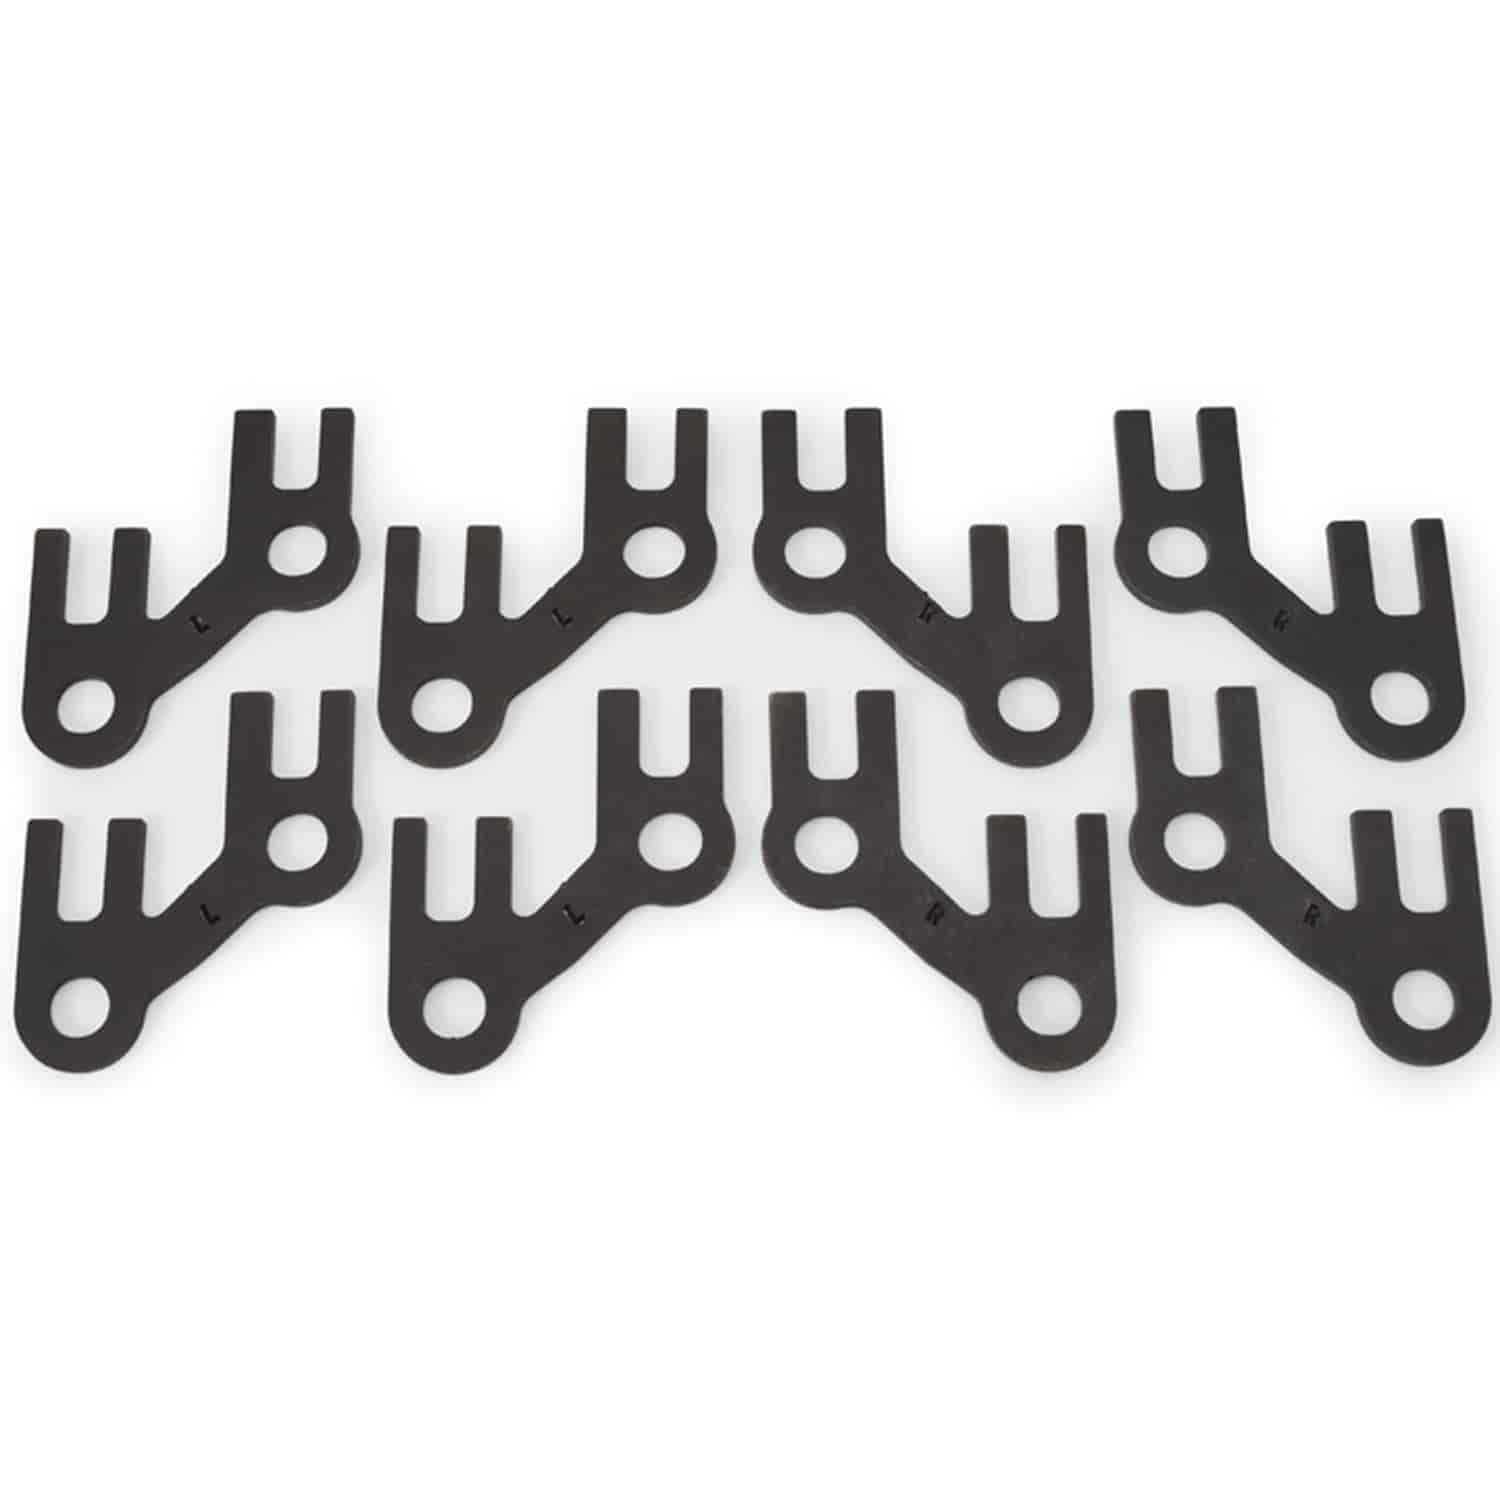 Pushrod Guideplates for Chevy 348/409 "W" Series Edelbrock Heads Chevy 409/348